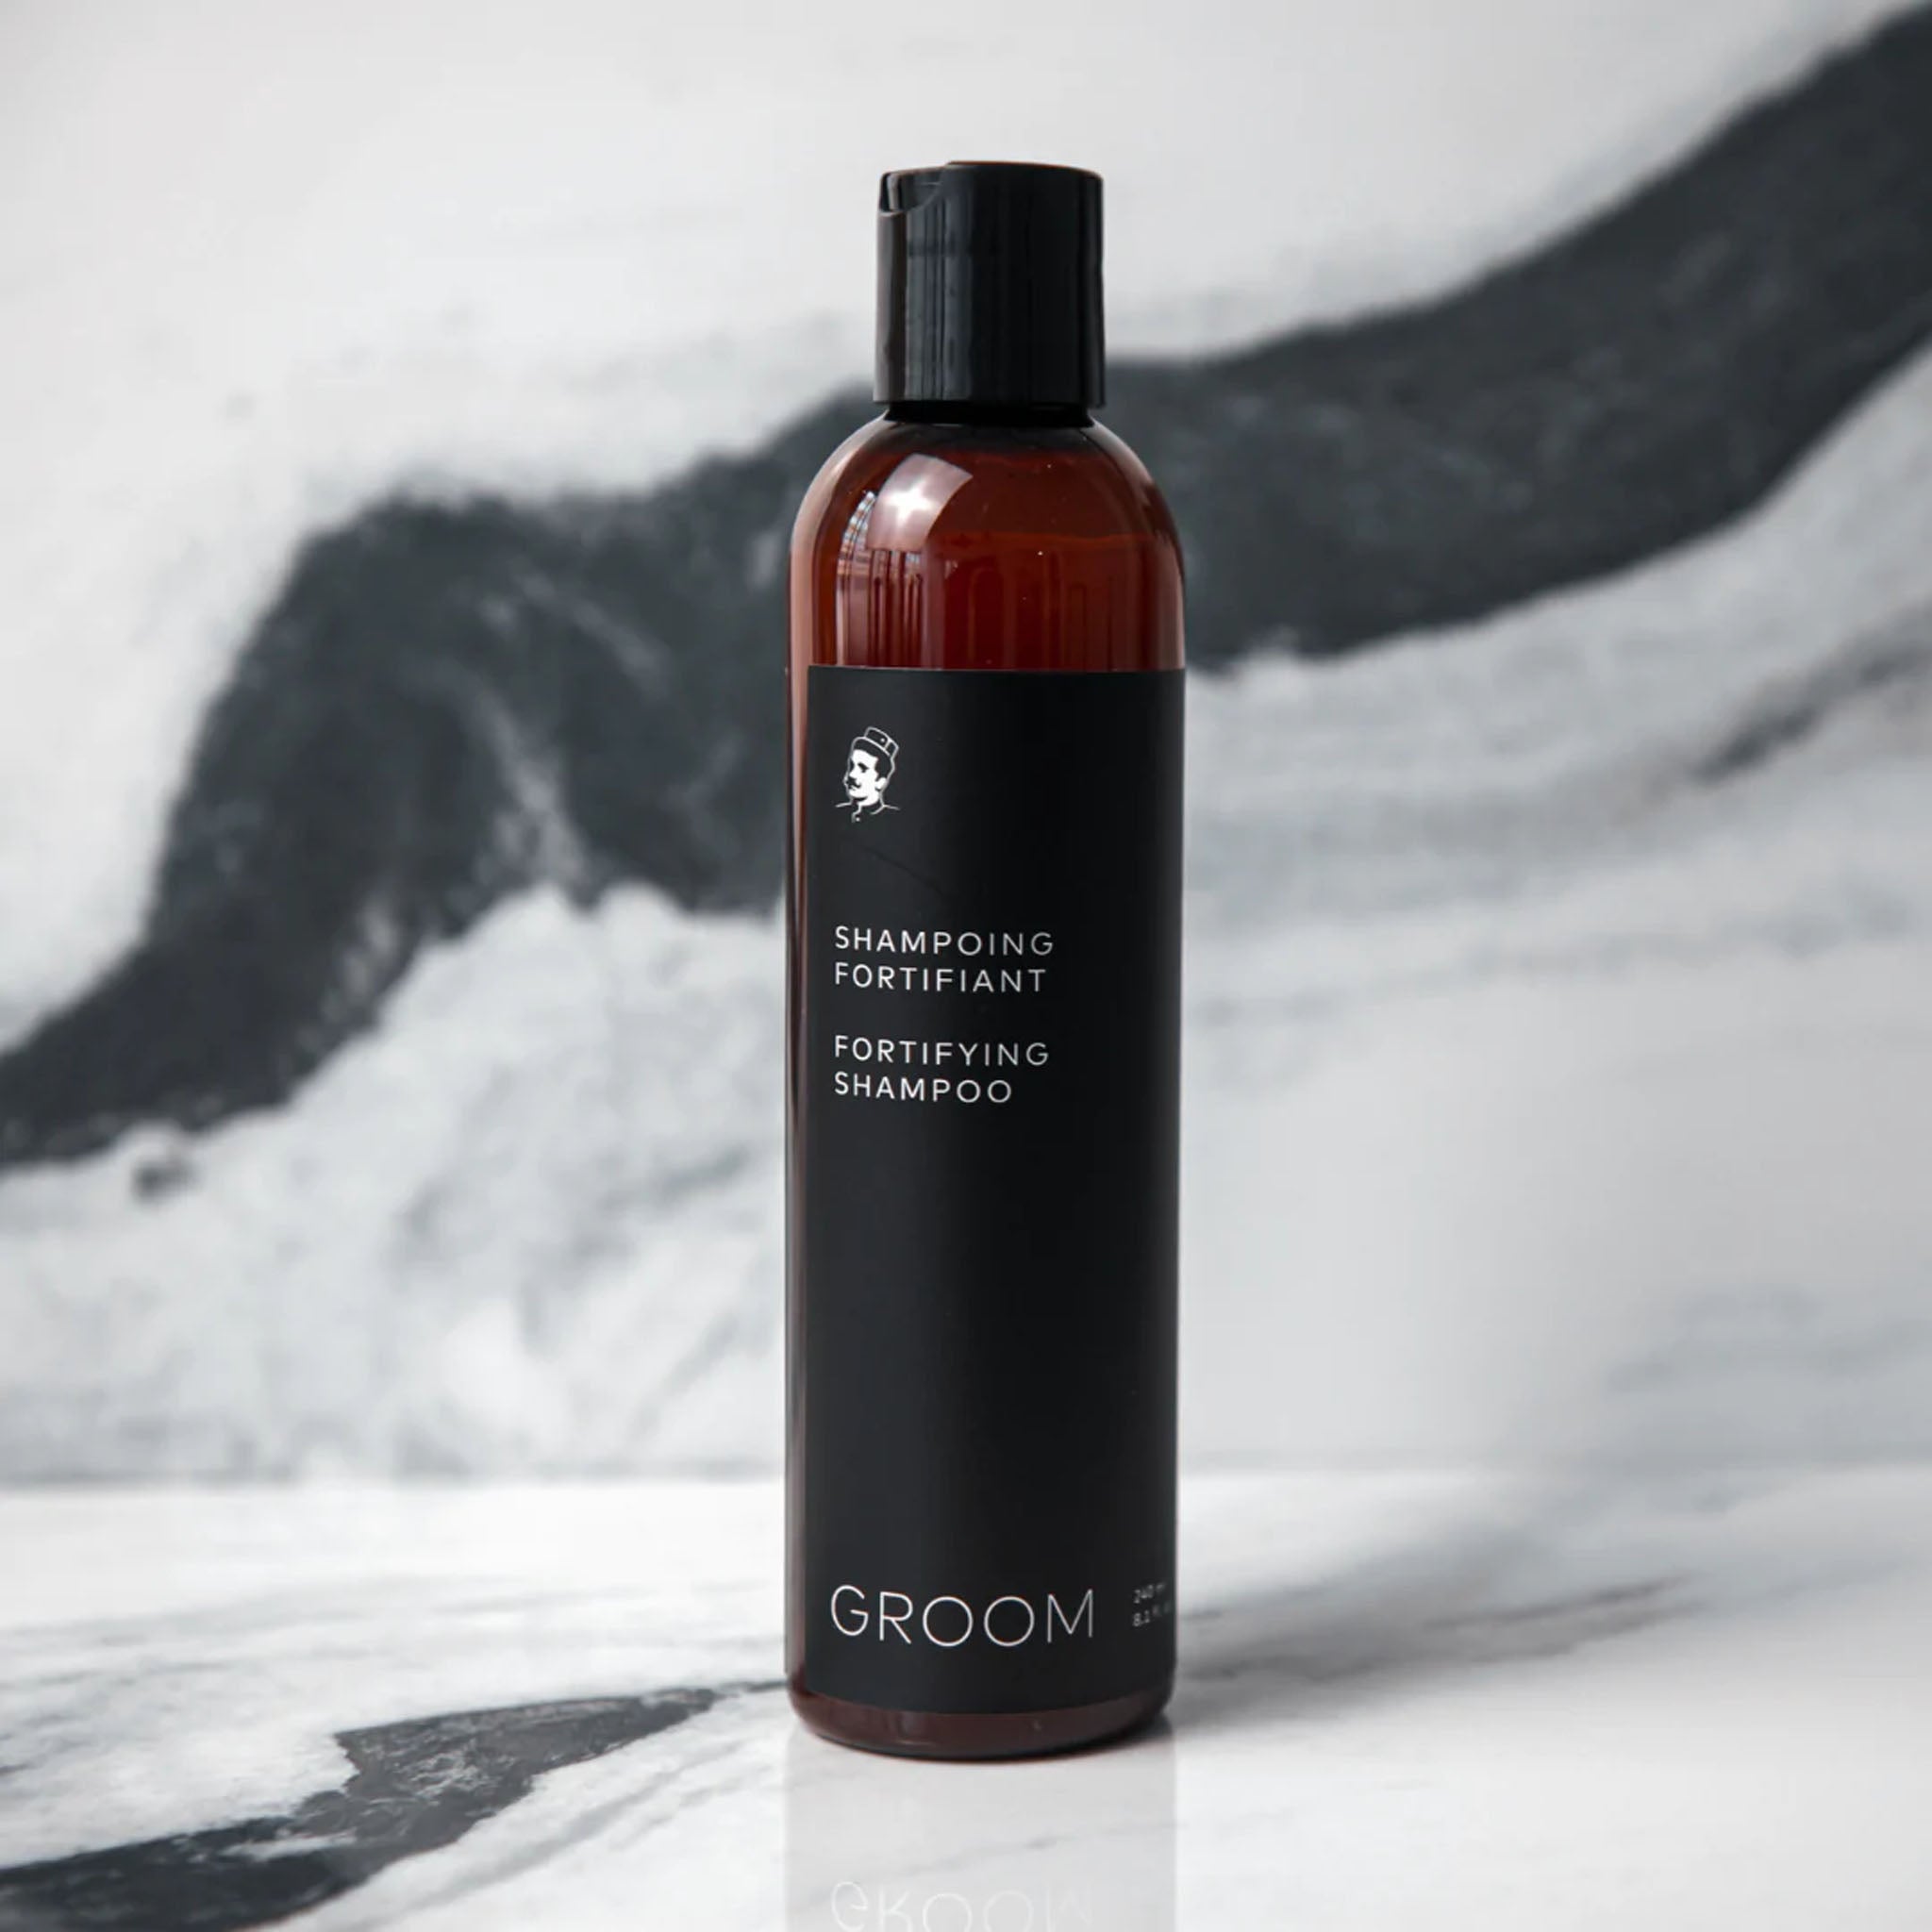 Groom. Shampoing Fortifiant - 475 ml - Concept C. Shop